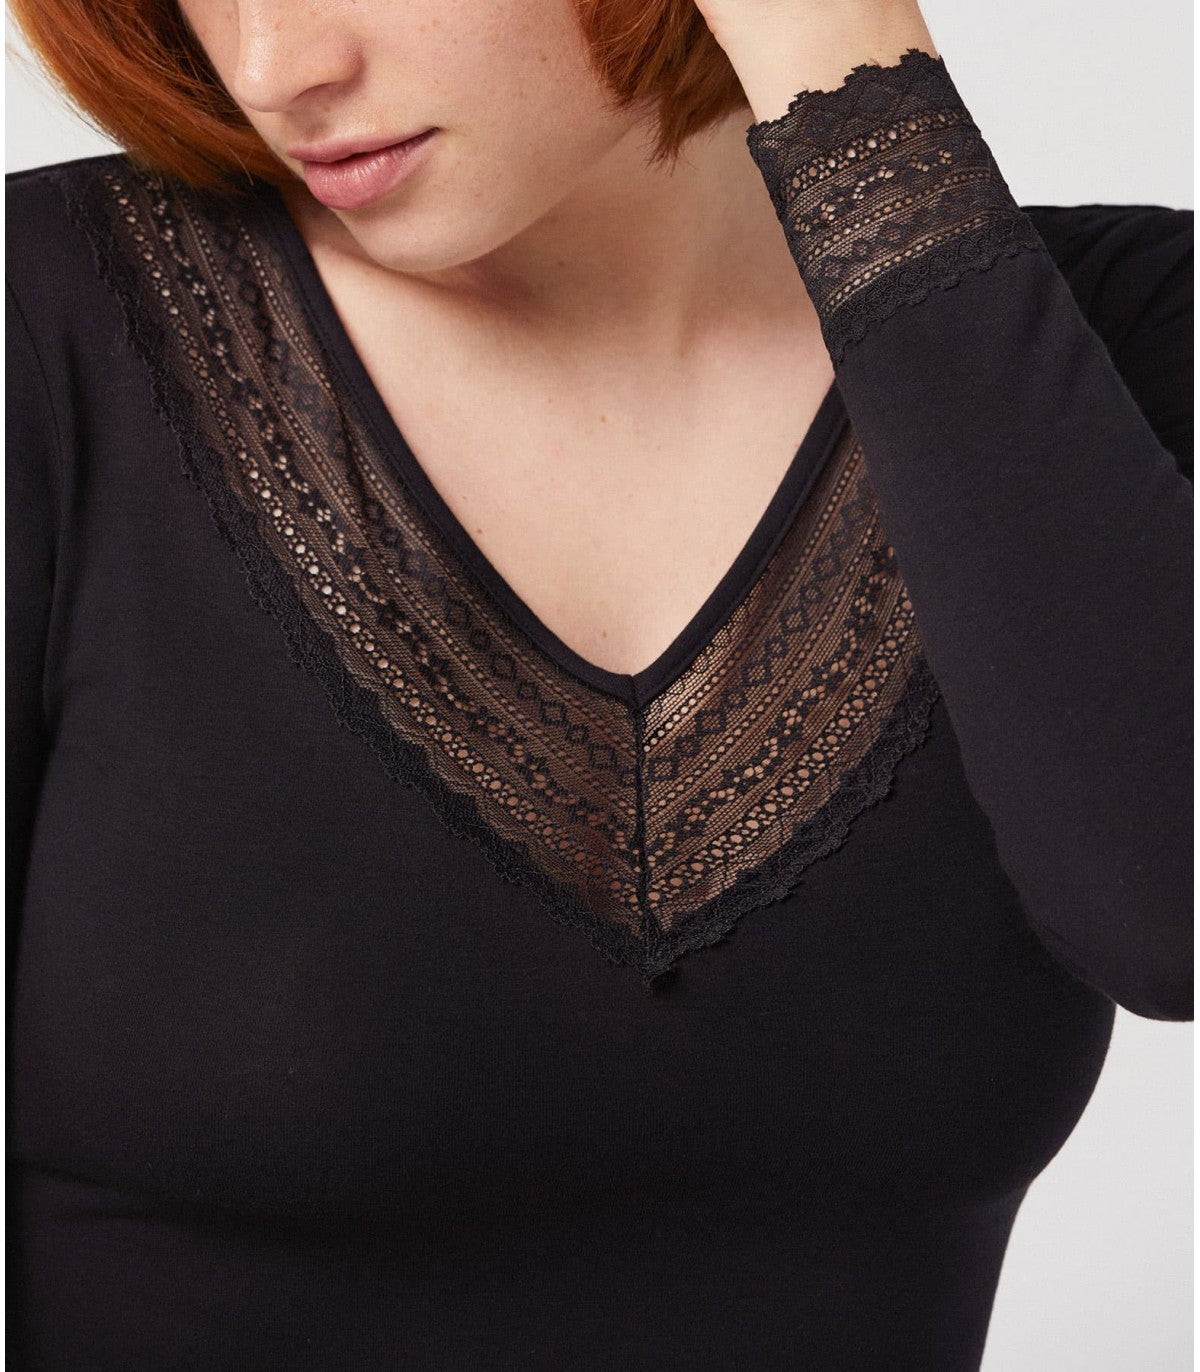 Ysabel Mora 19250 Lace Trim Top - Soft and warm long sleeved black vest top with a lace trim v-neck and lace trim cuffs.